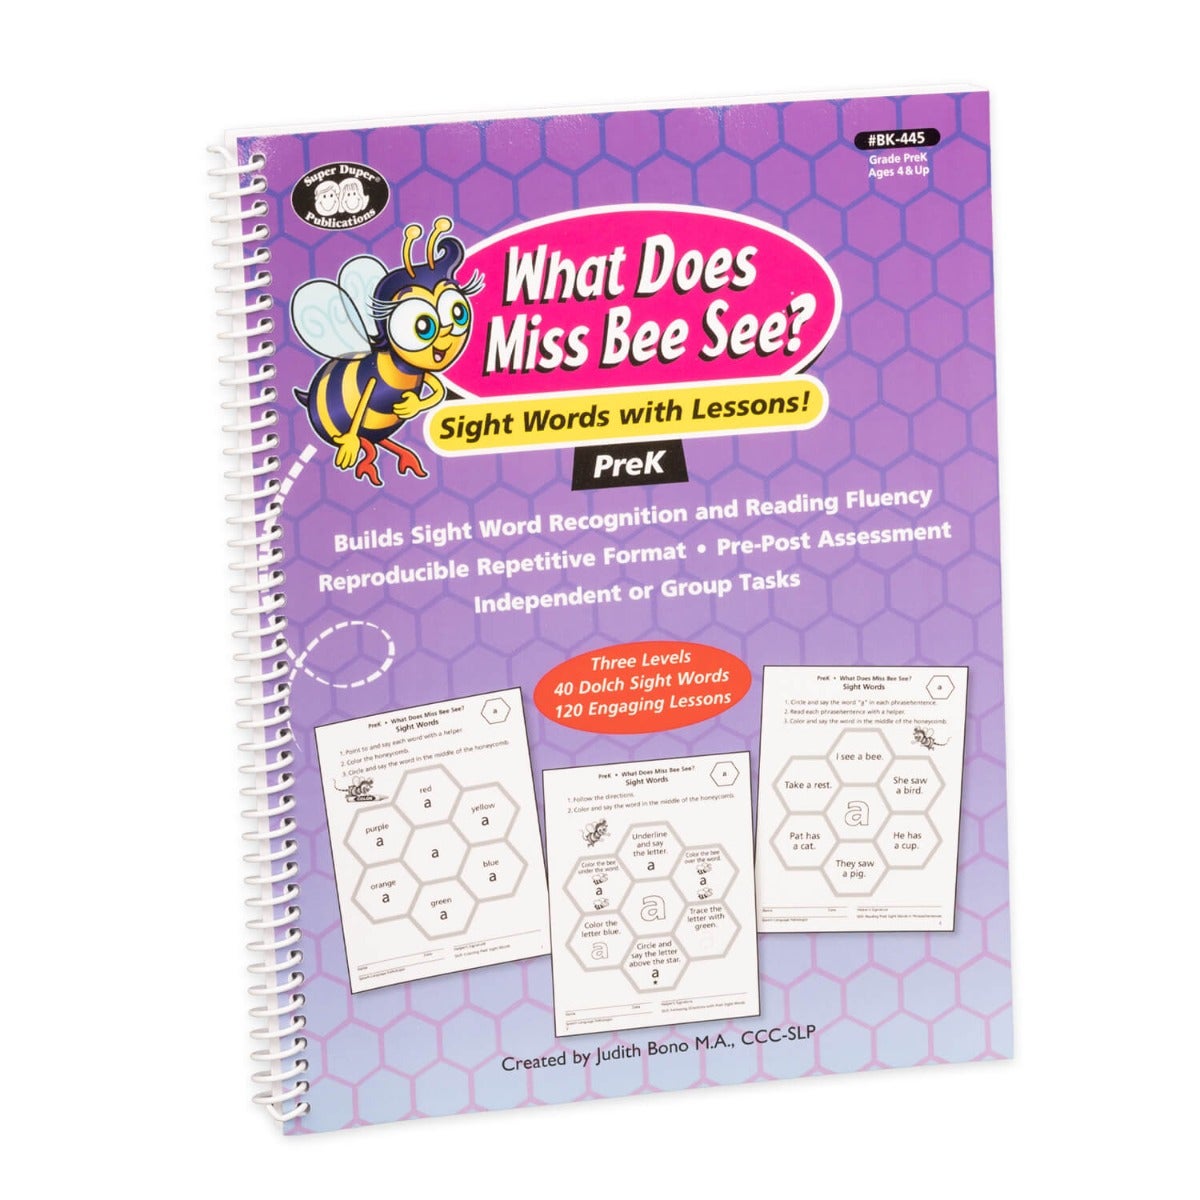 What Does Miss Bee See? (PreK) Book that teaches children sight word recognition and improves reading fluency 